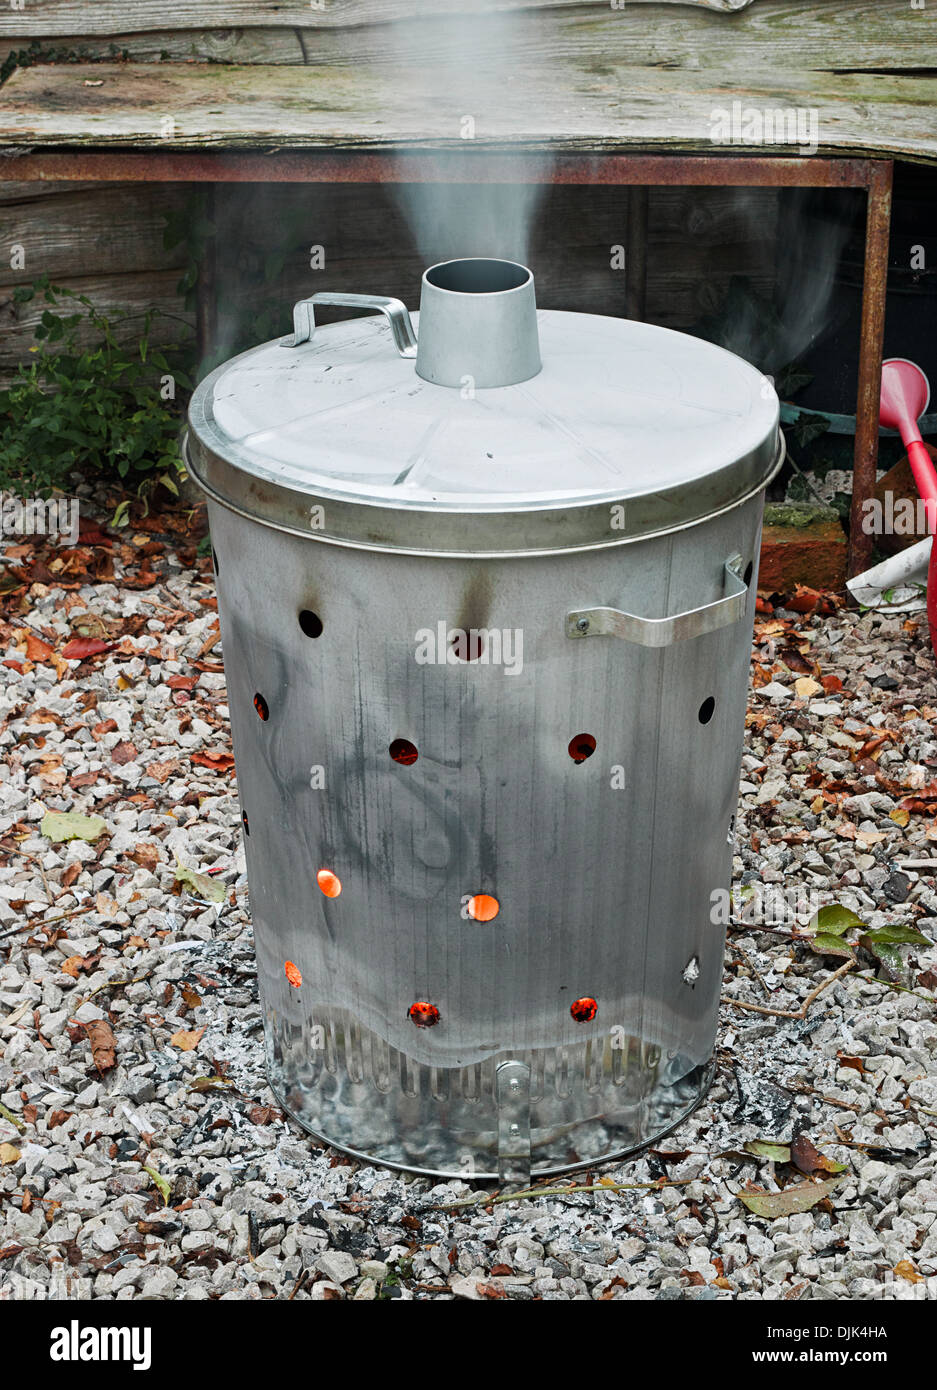 Garden incinerator bin burning garden waste with smoke coming out of the flue Stock Photo